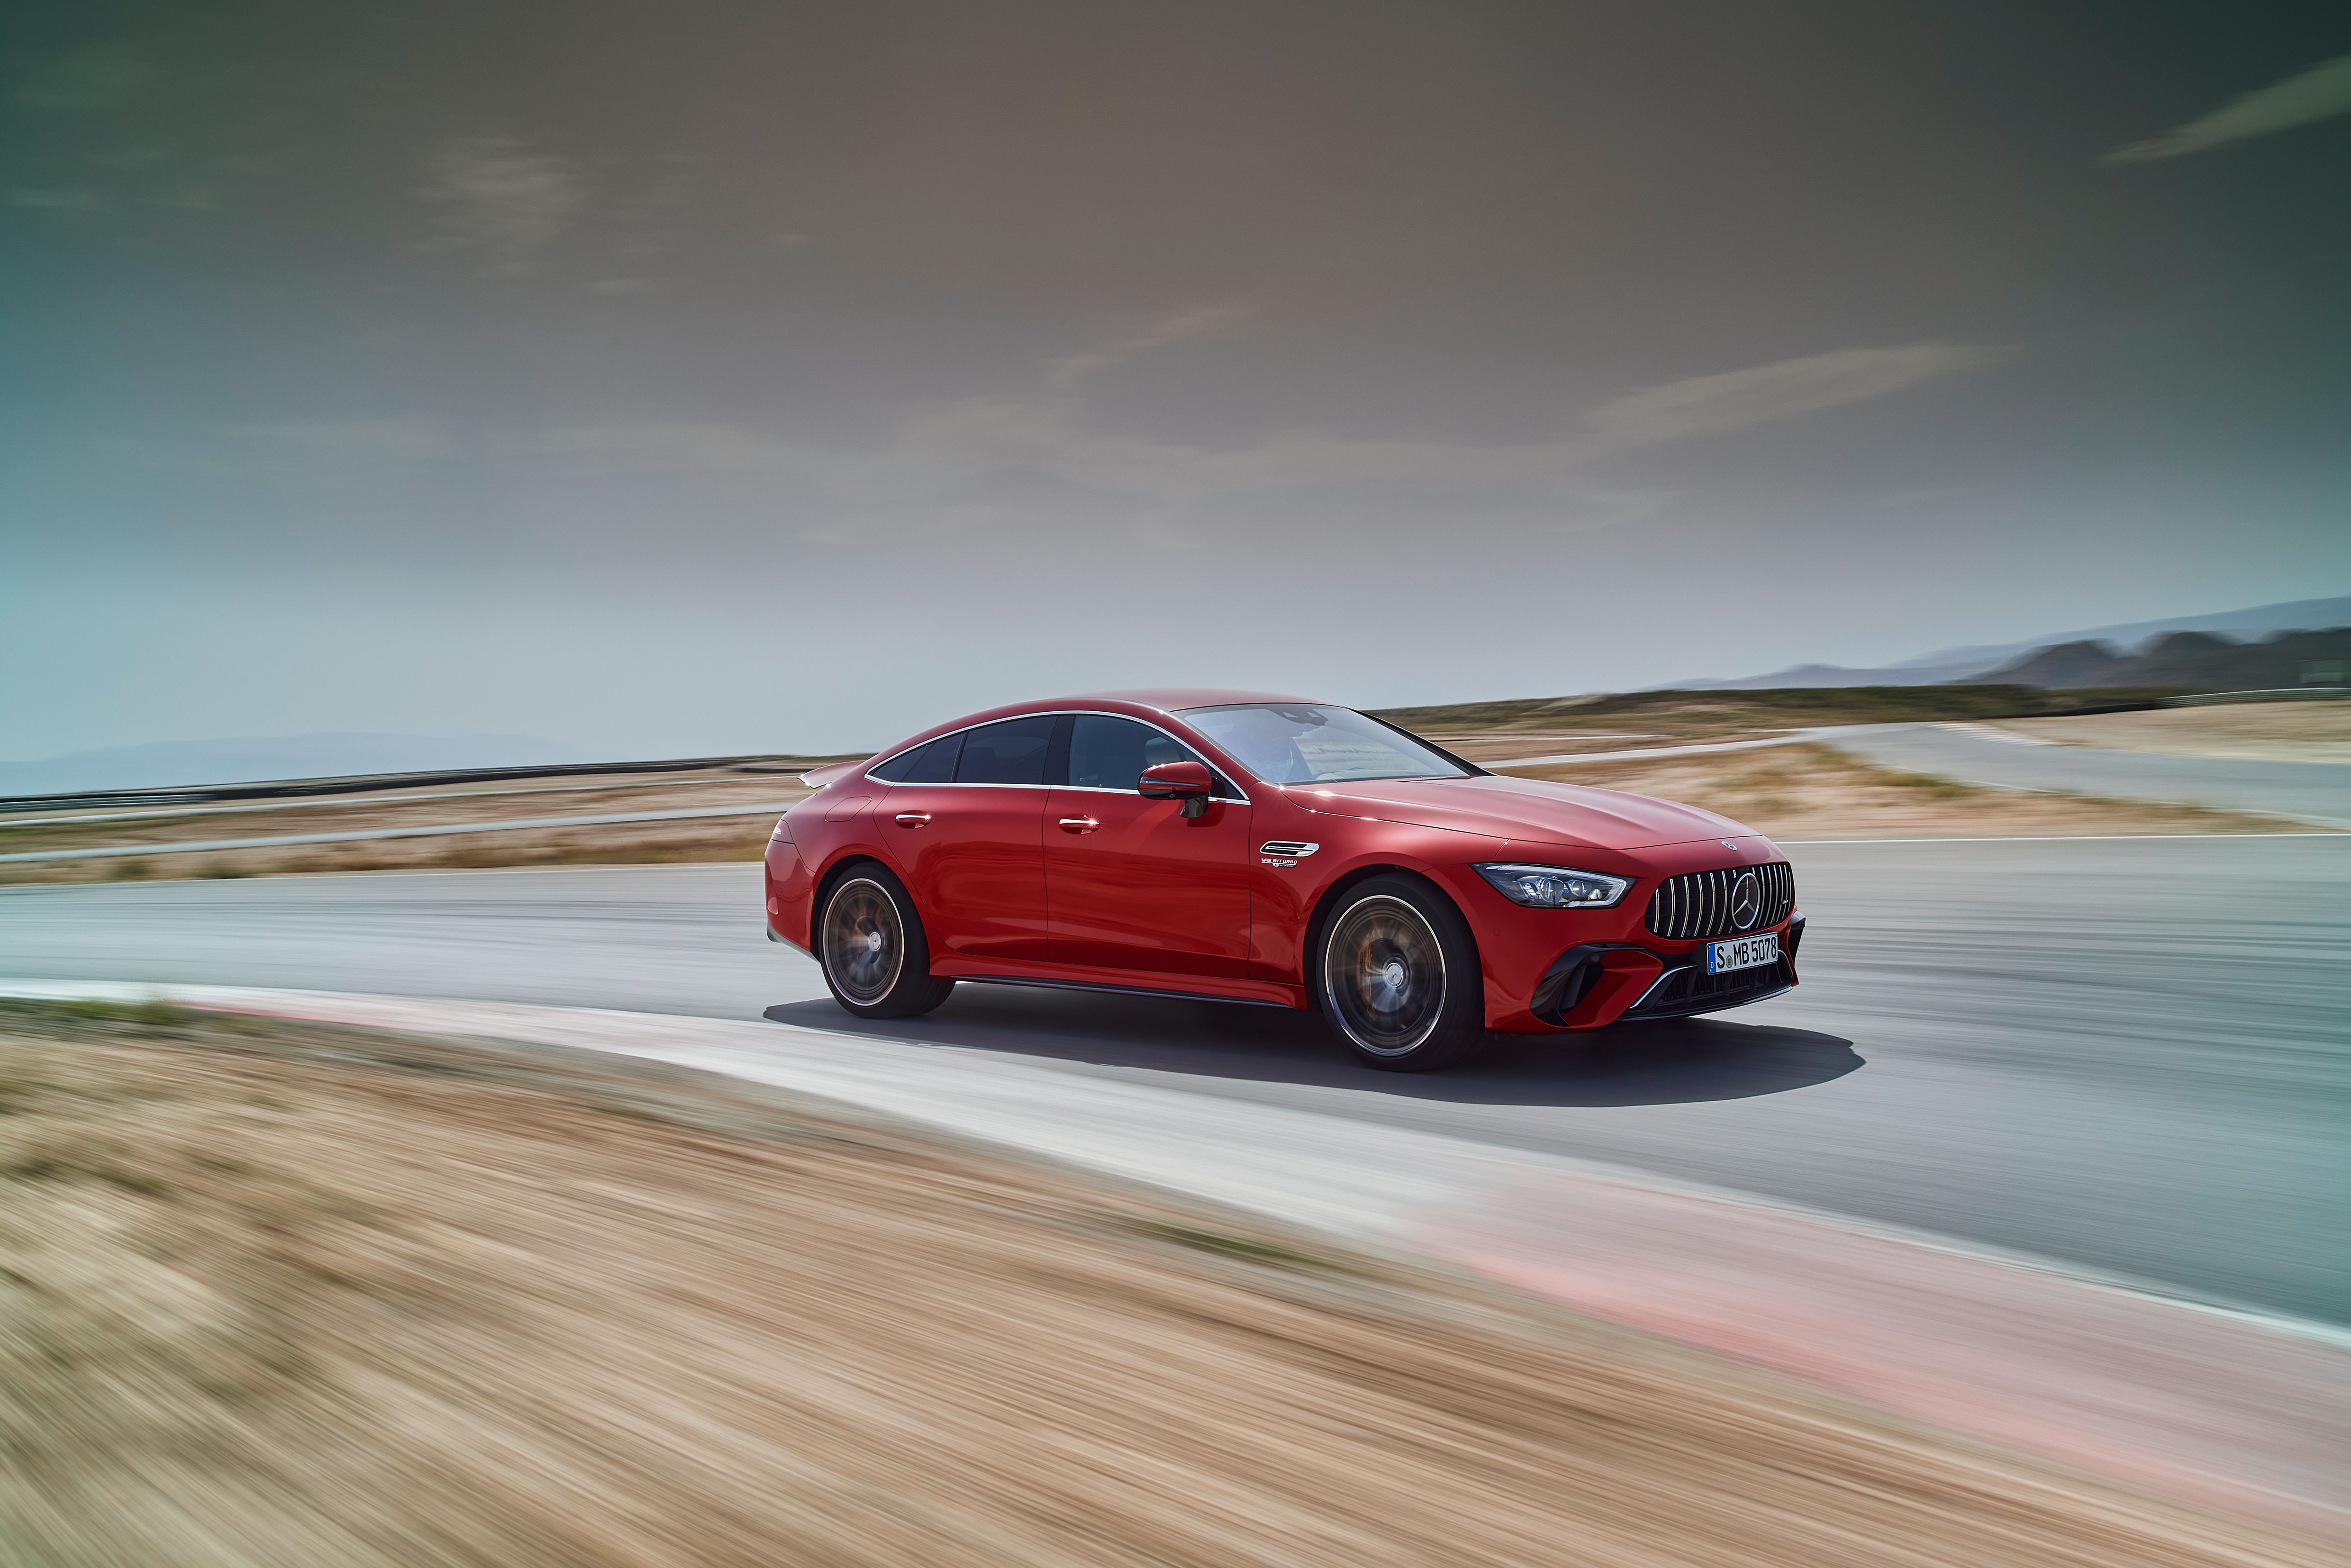 2023 MercedesAMG GT 63S E The Most Powerful Production Vehicle From